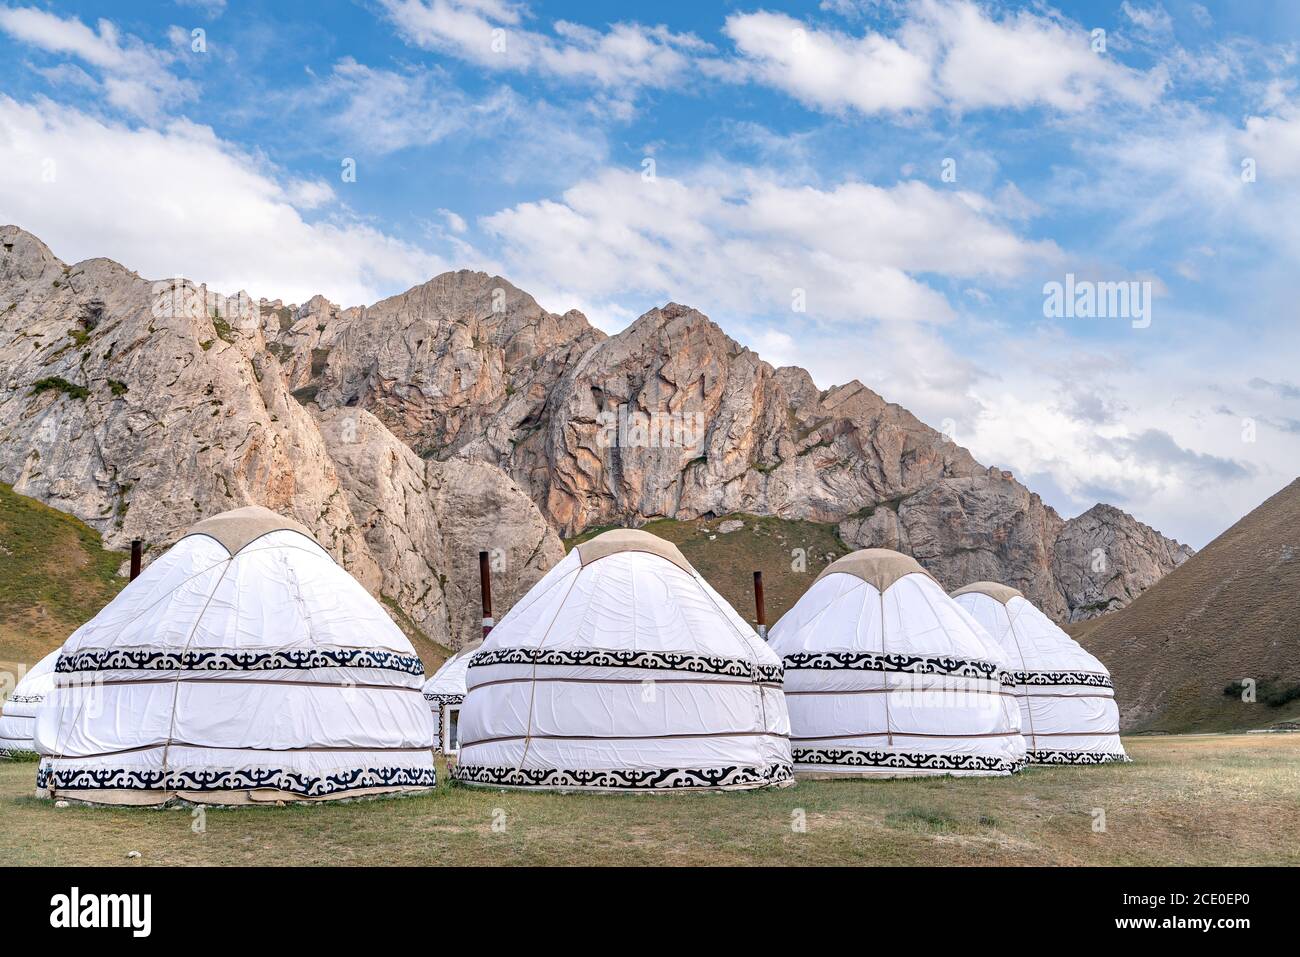 The view of yurts nomad village in Tash-Rabat in Kyrgyzstan Stock Photo